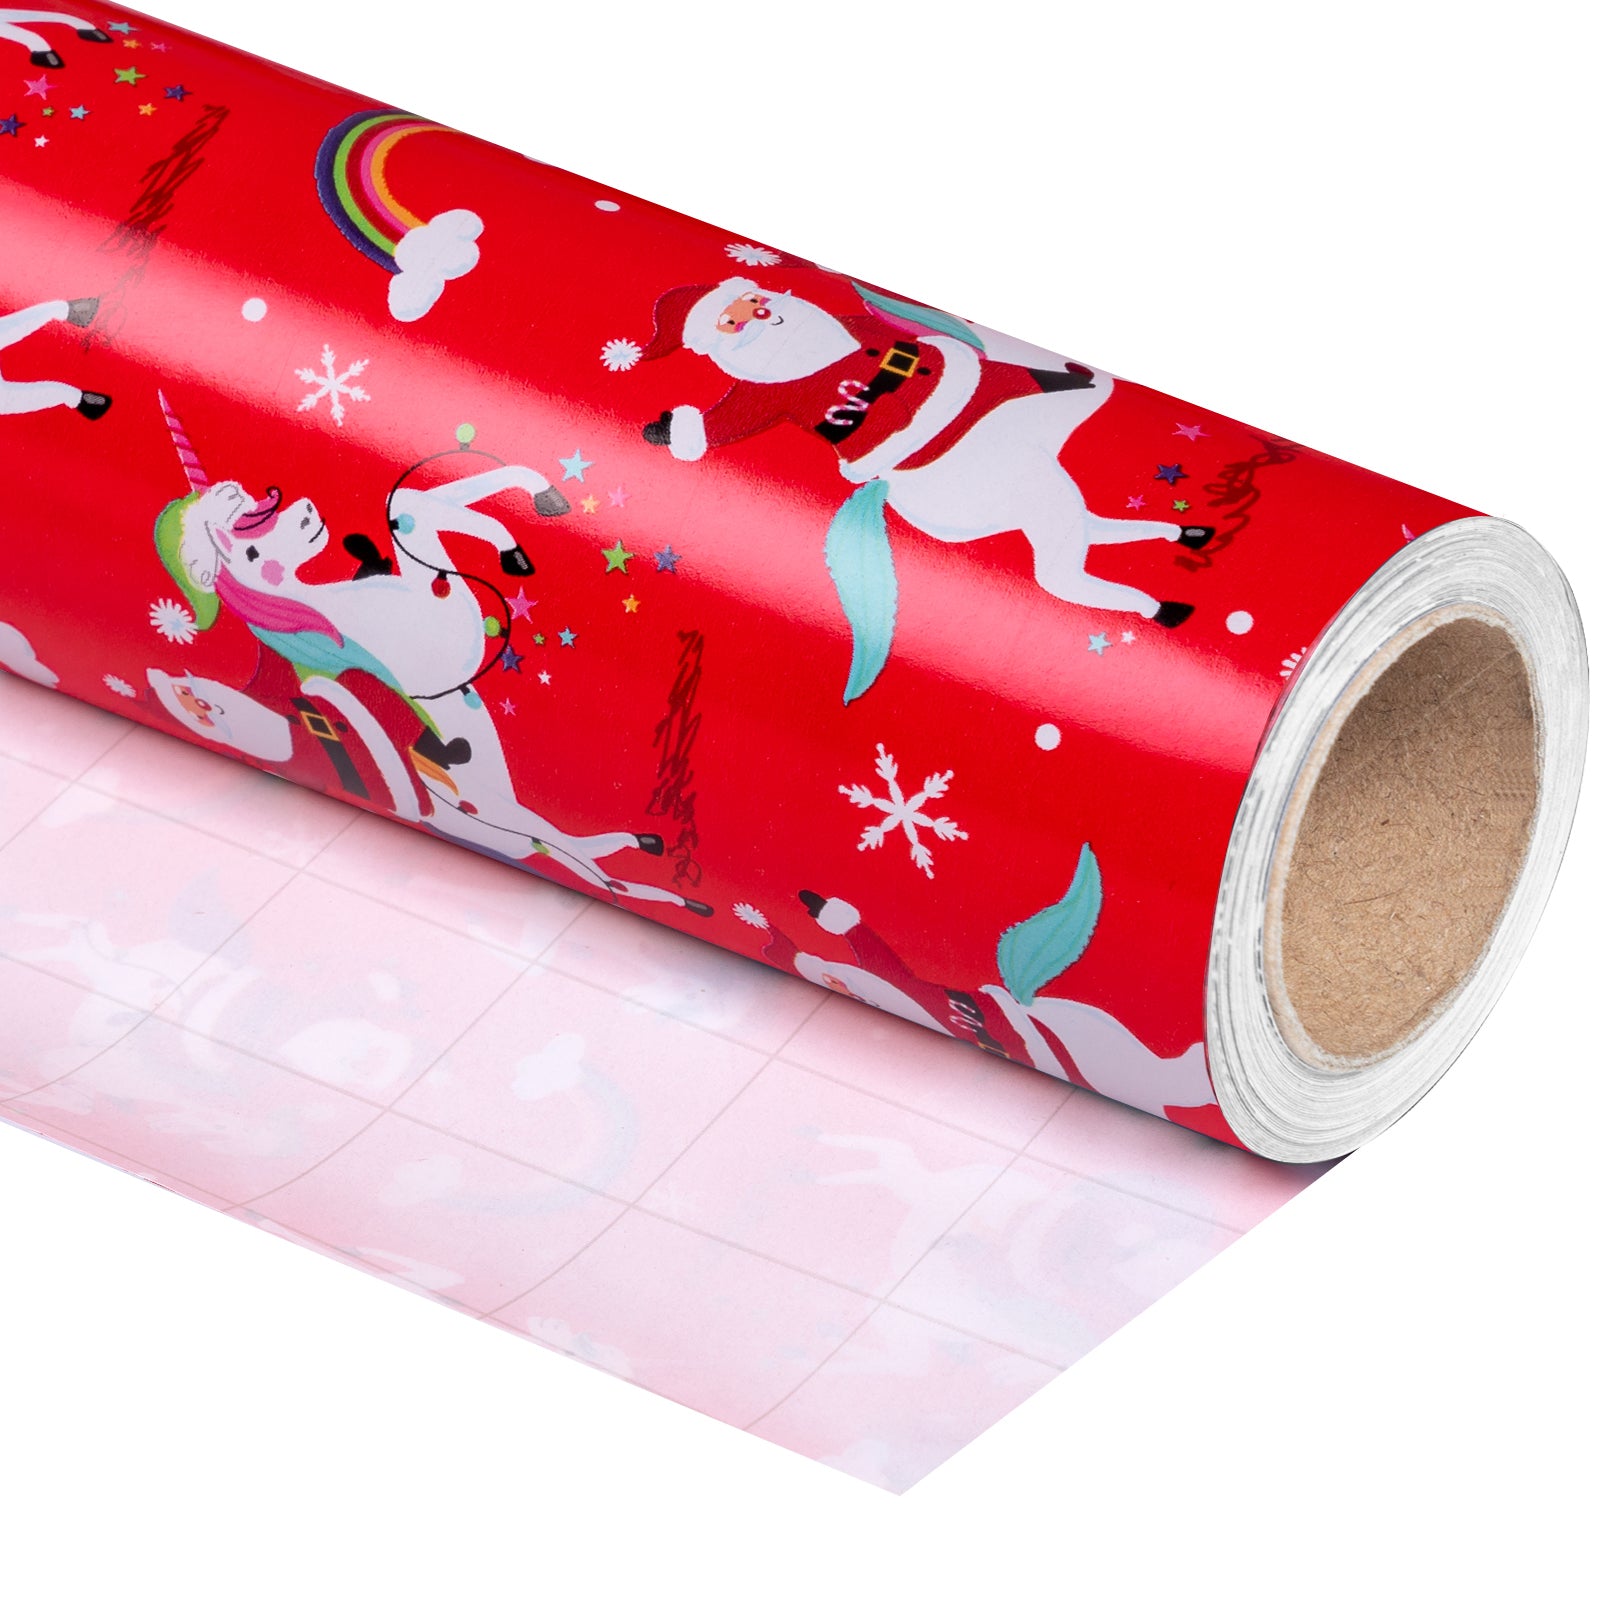 Red Unicorn Santa Claus Wrapping Paper Roll Wholesale Wrapholic